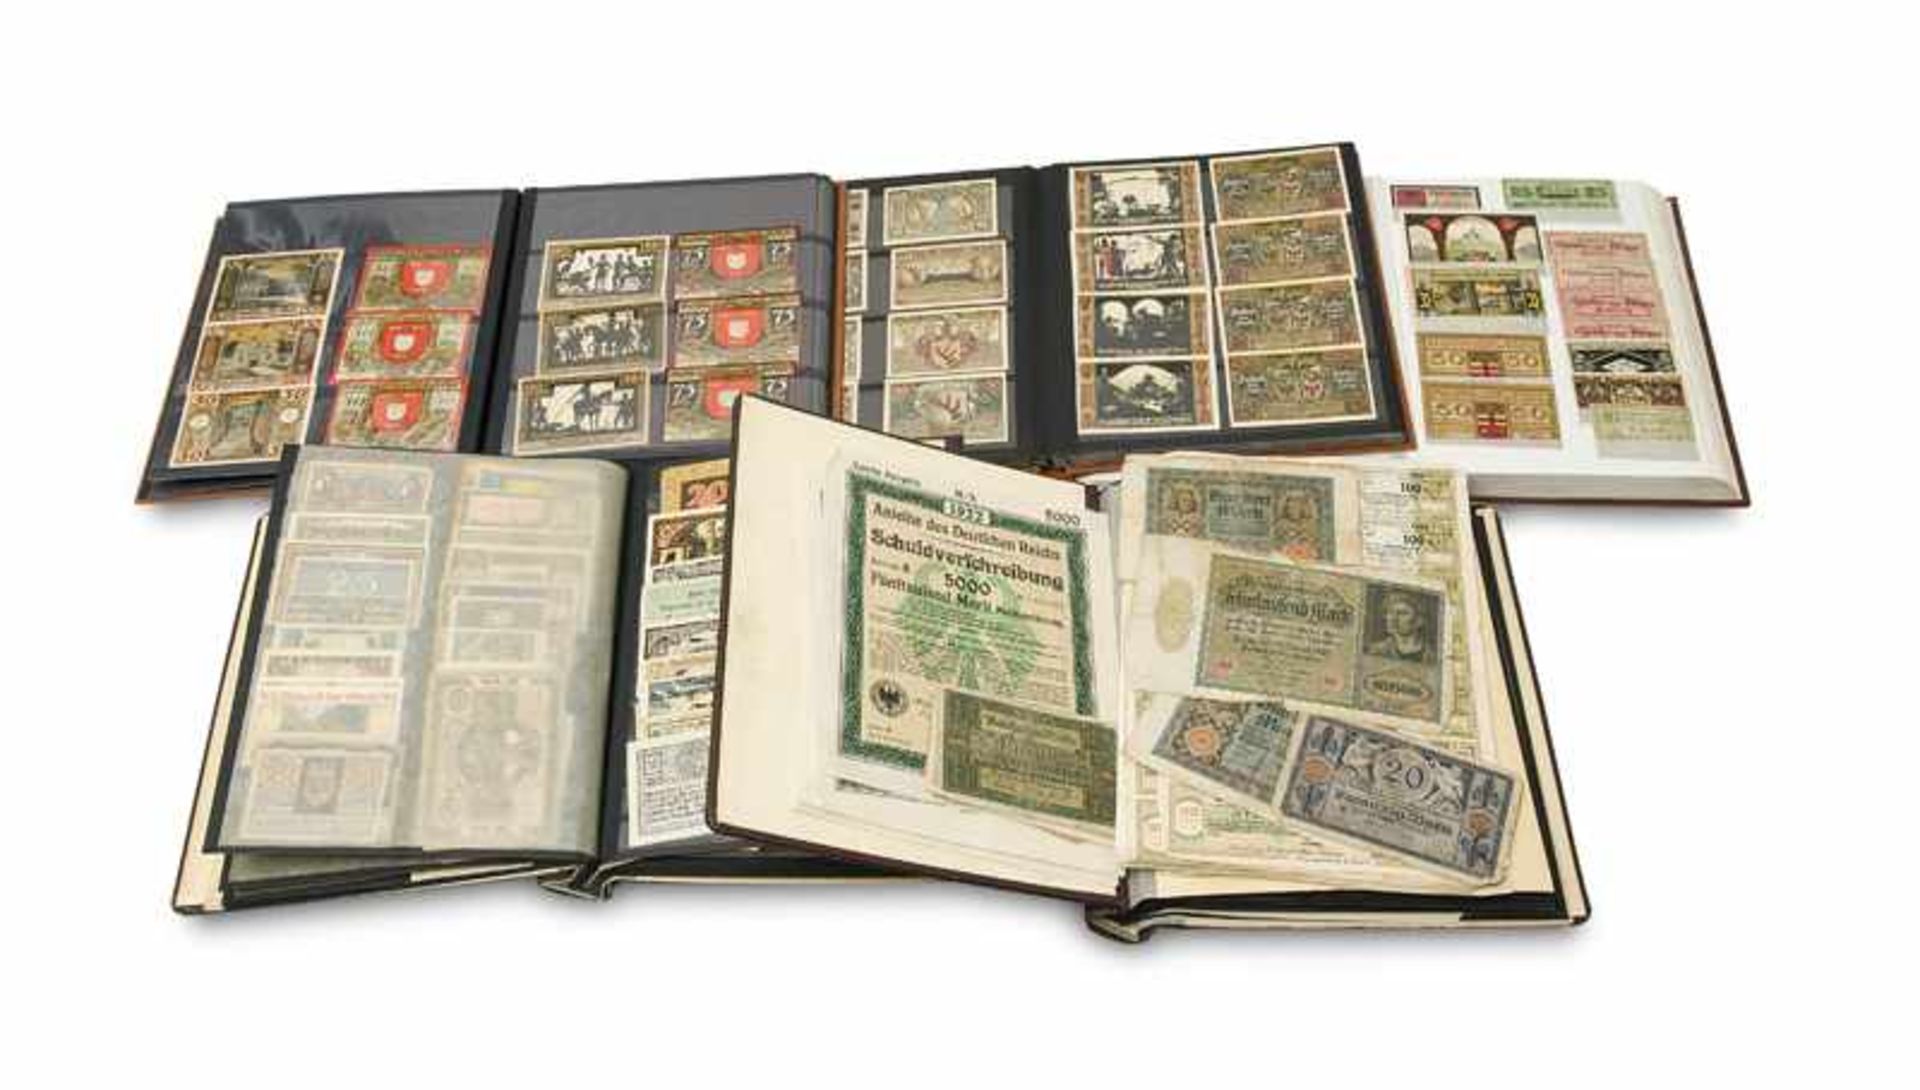 Numismatics Collection of 5 folders with emergency banknotes from the 1920s. Contains approx. 1000